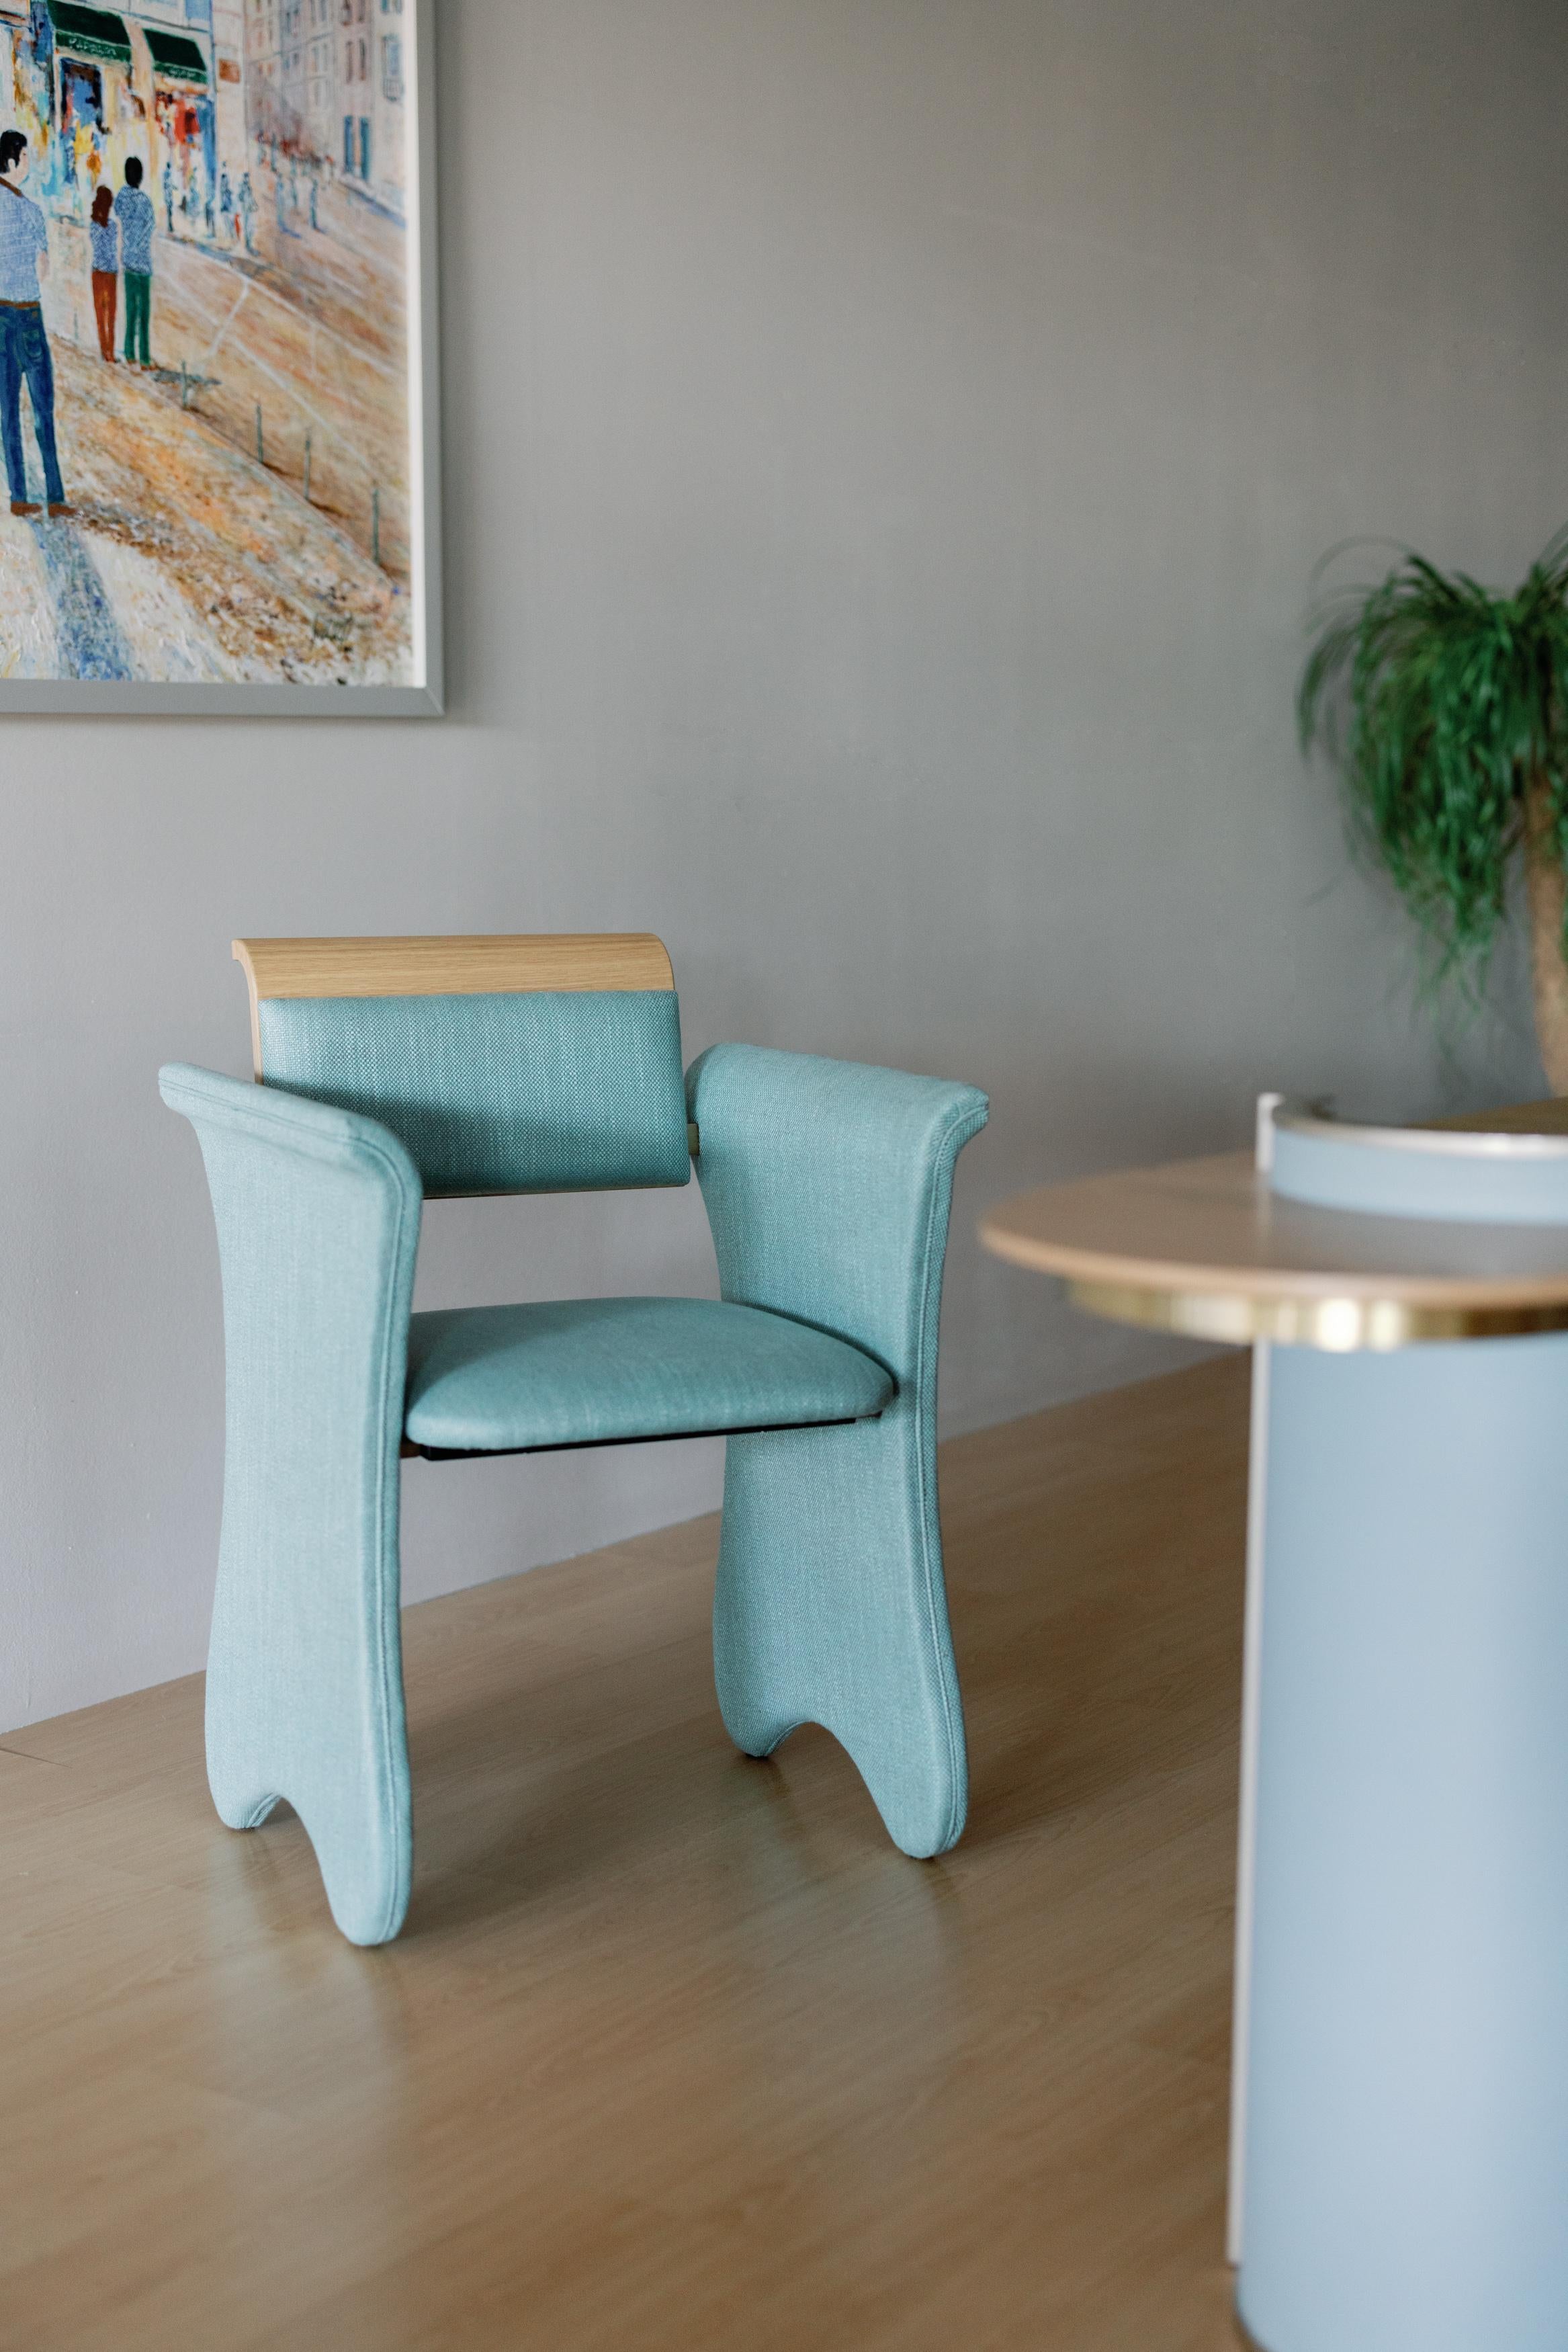 Greenapple Chair, Contemporary Collection, Handcrafted in Portugal - Europe by Greenapple.

The Timeless bouclé office chair was designed and crafted to endure the passage of time, serving as a companion through a lifetime of growth and experiences.